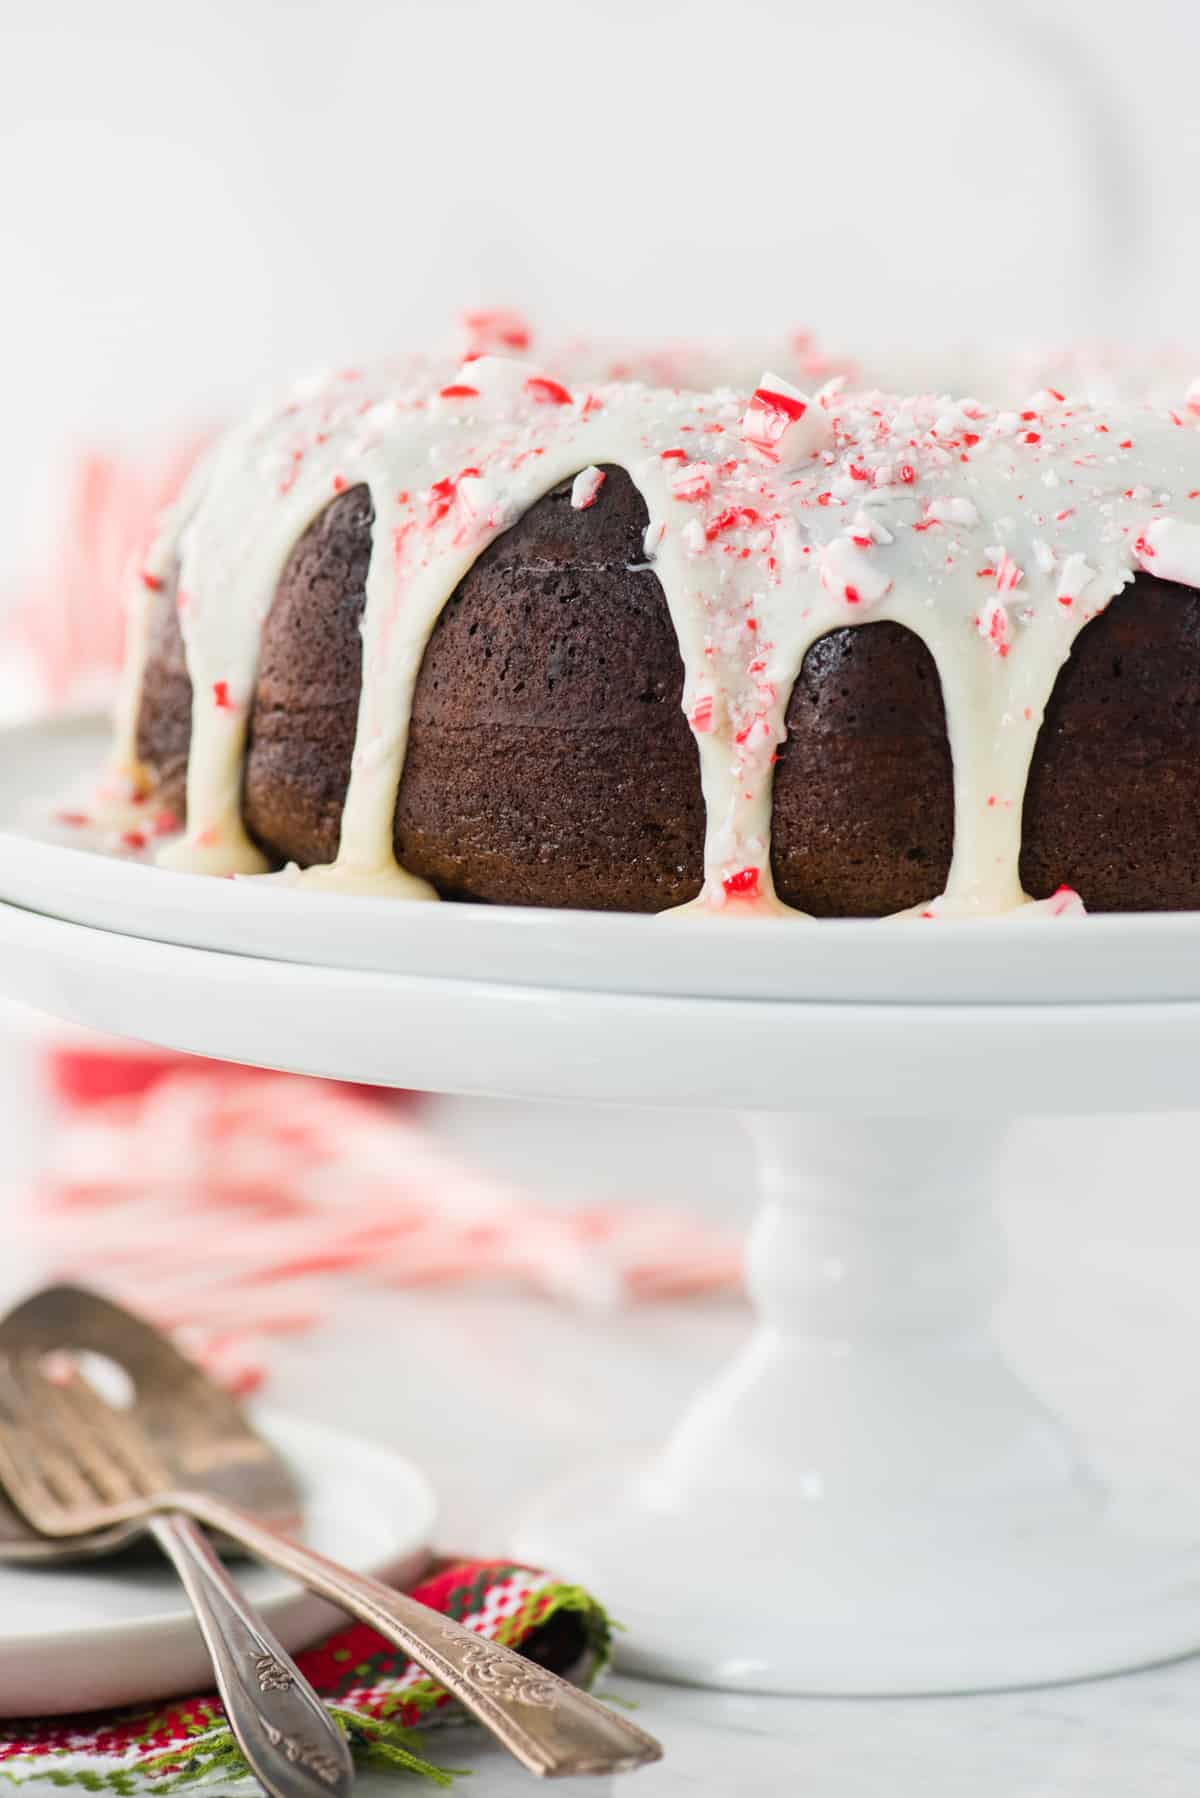 whole chocolate bundt cake with white chocolate glaze and candy cane pieces on white cake stand